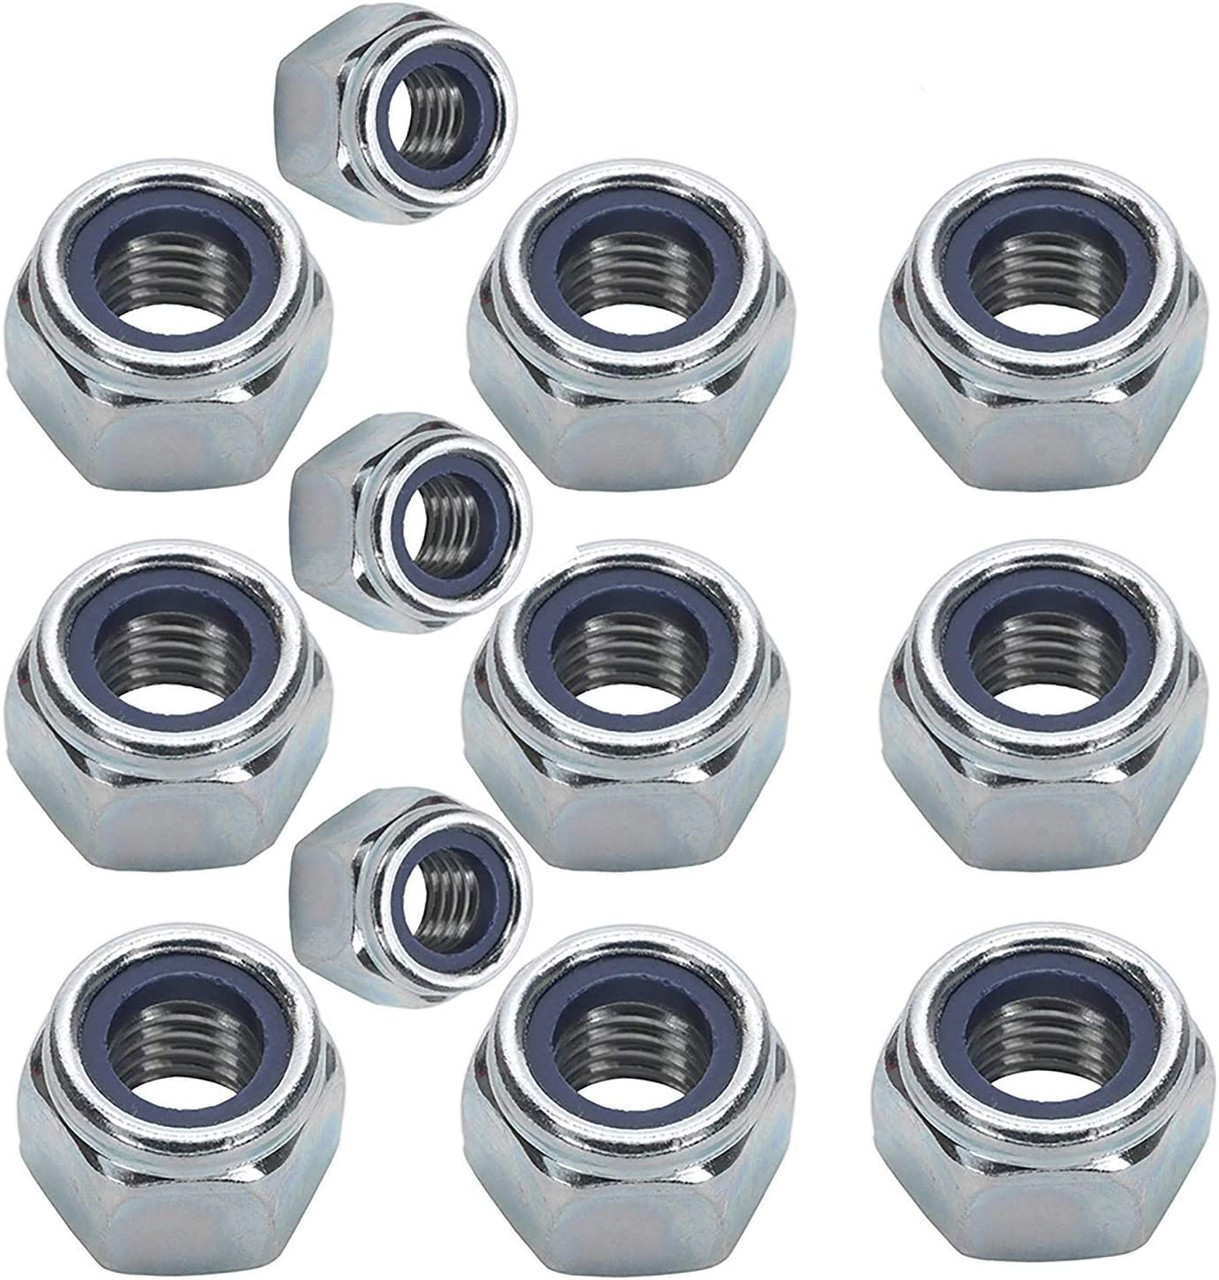 Nylock Lock Nuts M8 A2 Stainless Steel Nylon Insert 8mm X 1.25mm Pitch Pack of 75